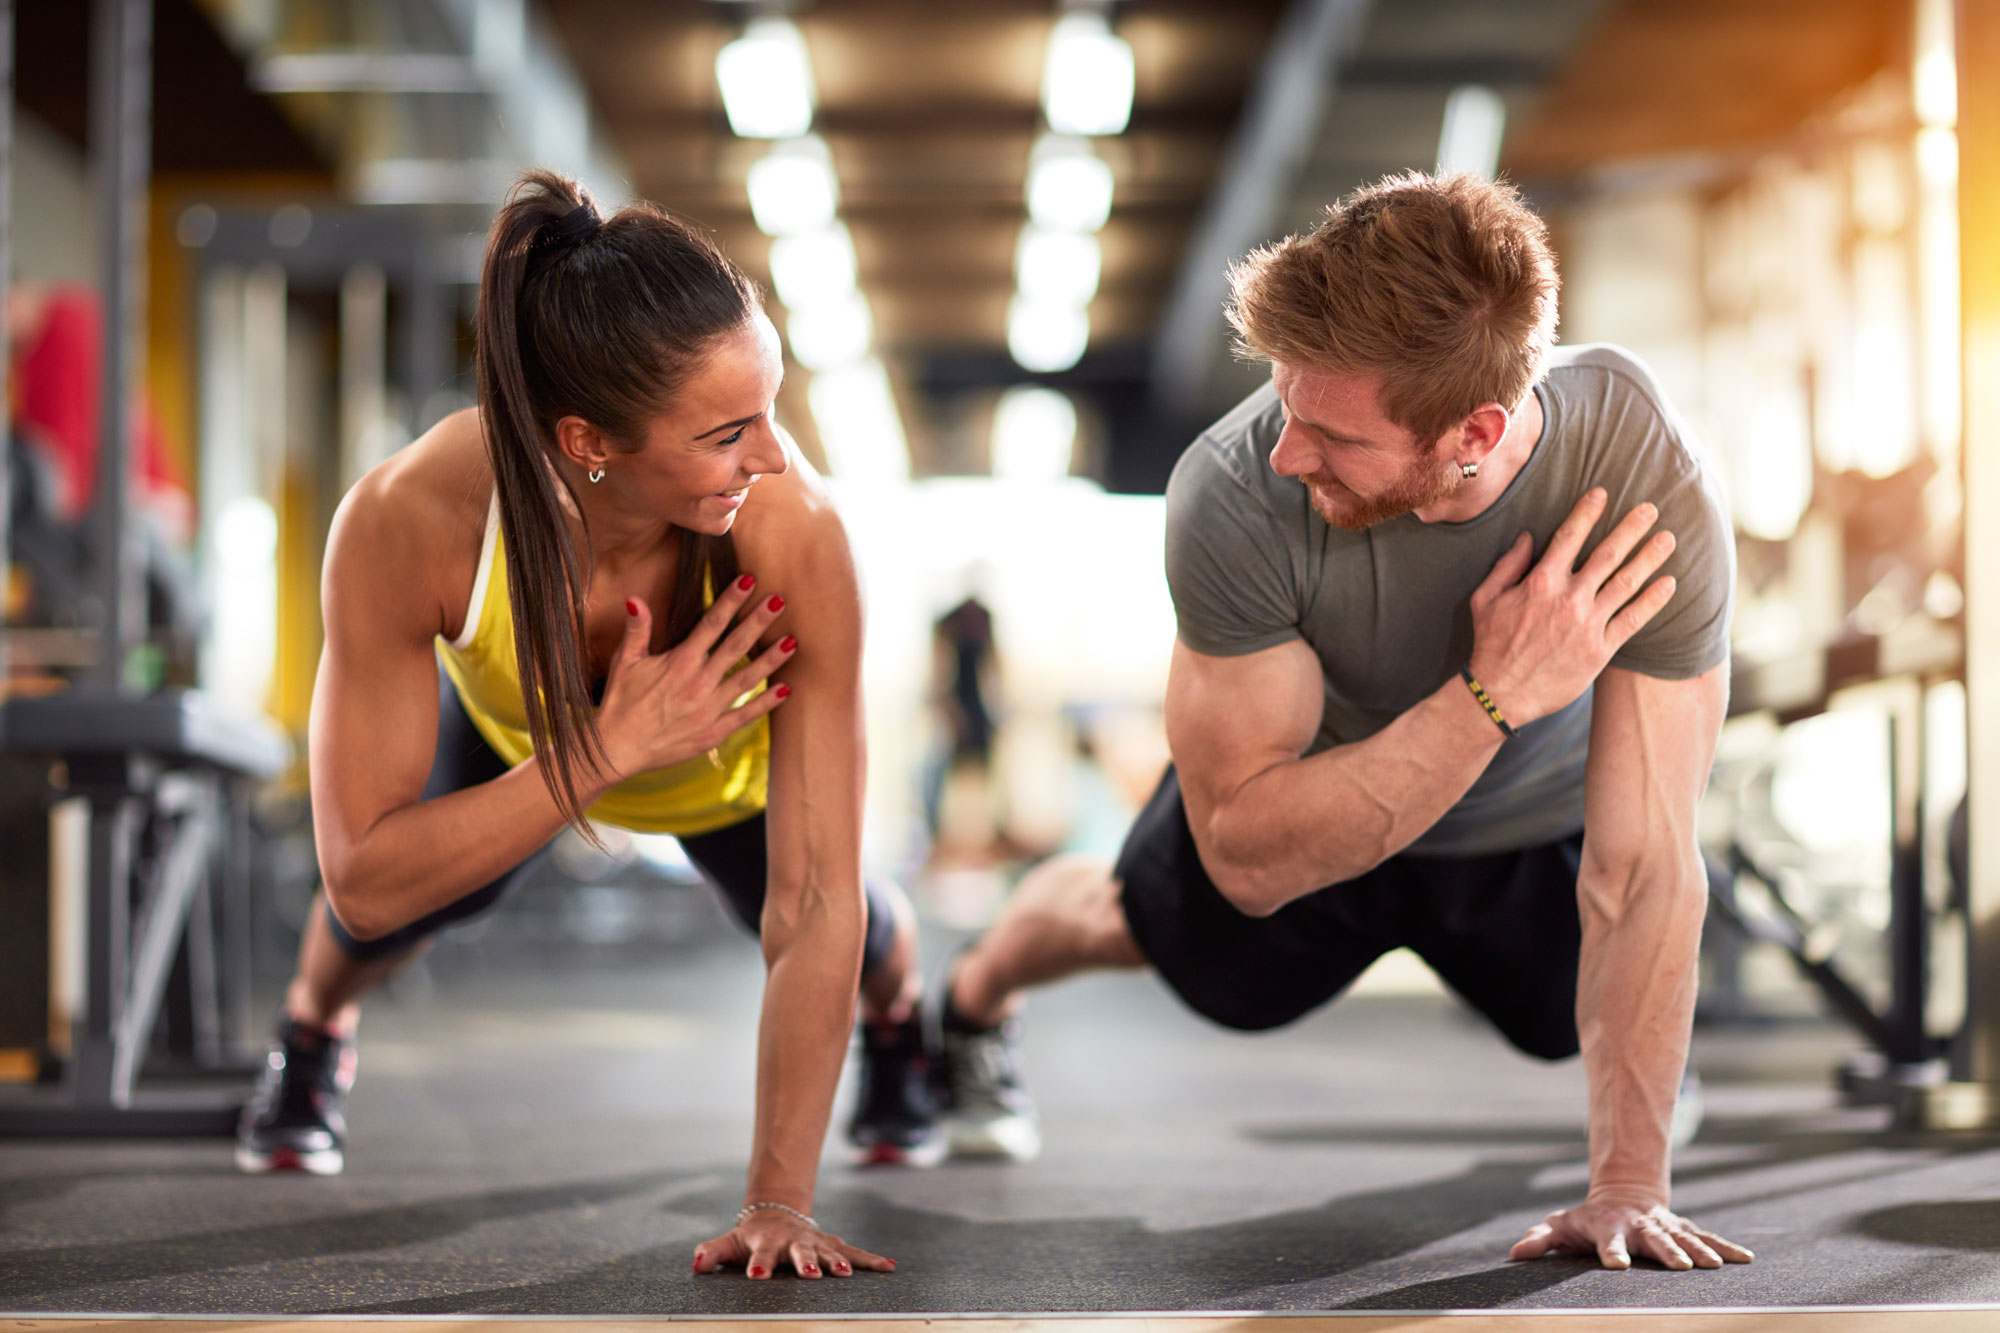 Fitness for Two? Selling Personal Training for Couples • Fitness Business Blog